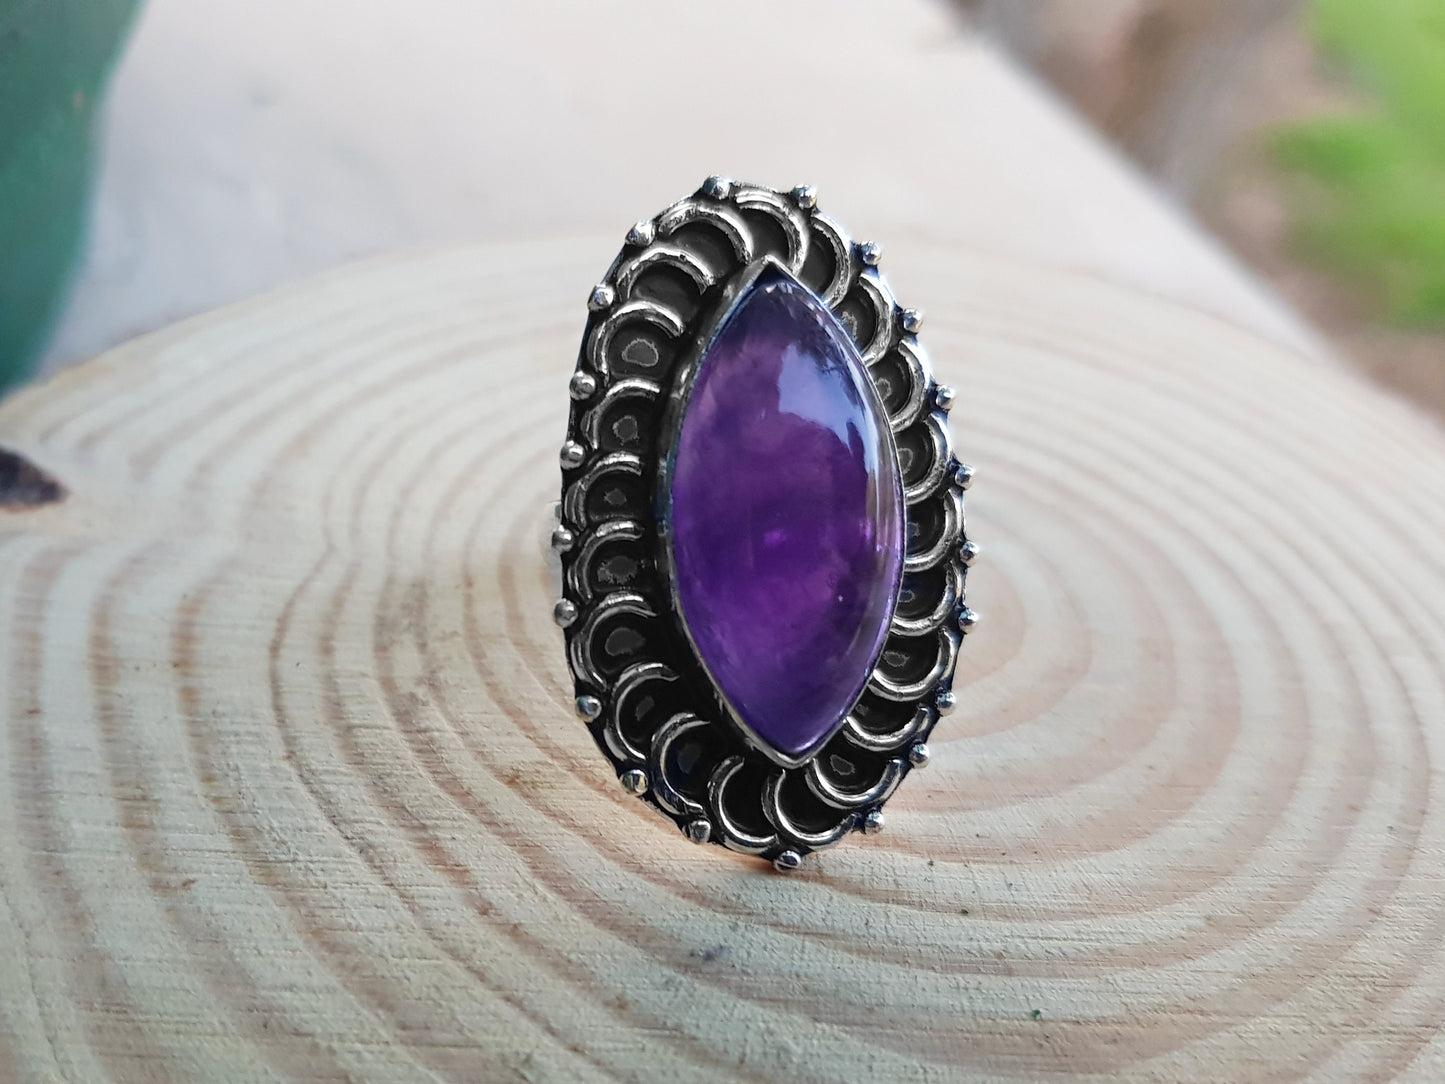 Amethyst Gemstone Ring Statement Ring In Sterling Silver Boho Ring Size US 8 3/4 One Of A Kind Gift Unique Jewellery